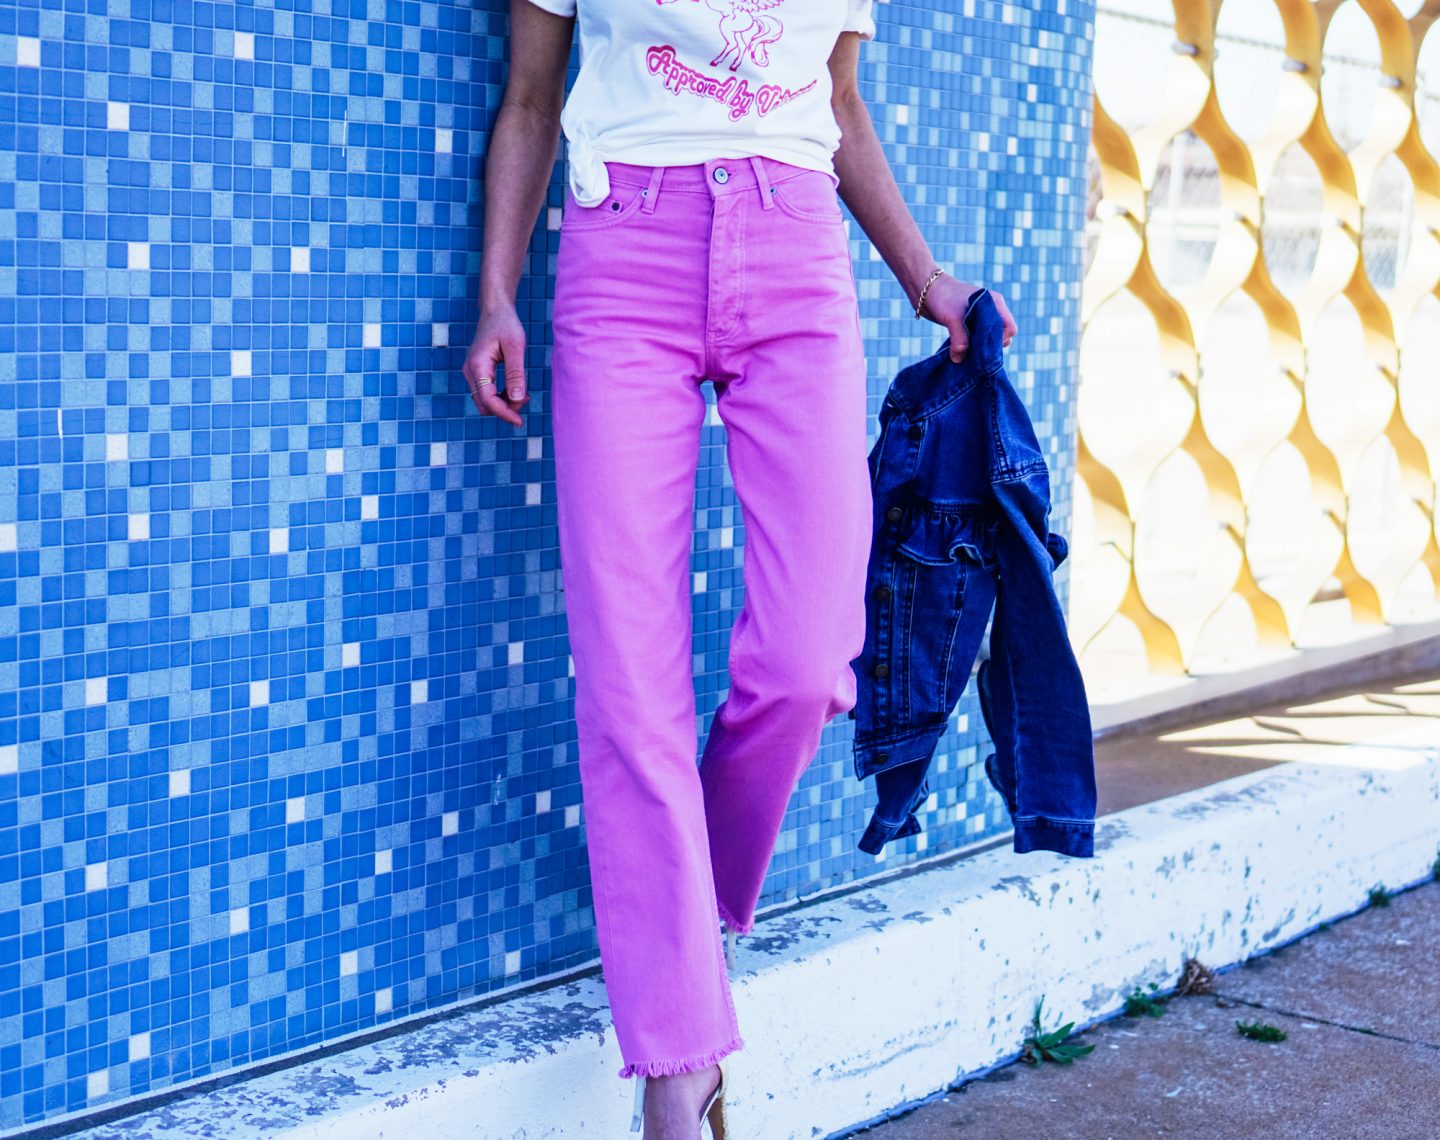 Curious as to how to rock a 70s vibe, but in a modern way? I'm over on TheDandyLiar.com talking about how to style your favorite flared denim, like these amazing pink high-waisted bell bottoms I just purchased!